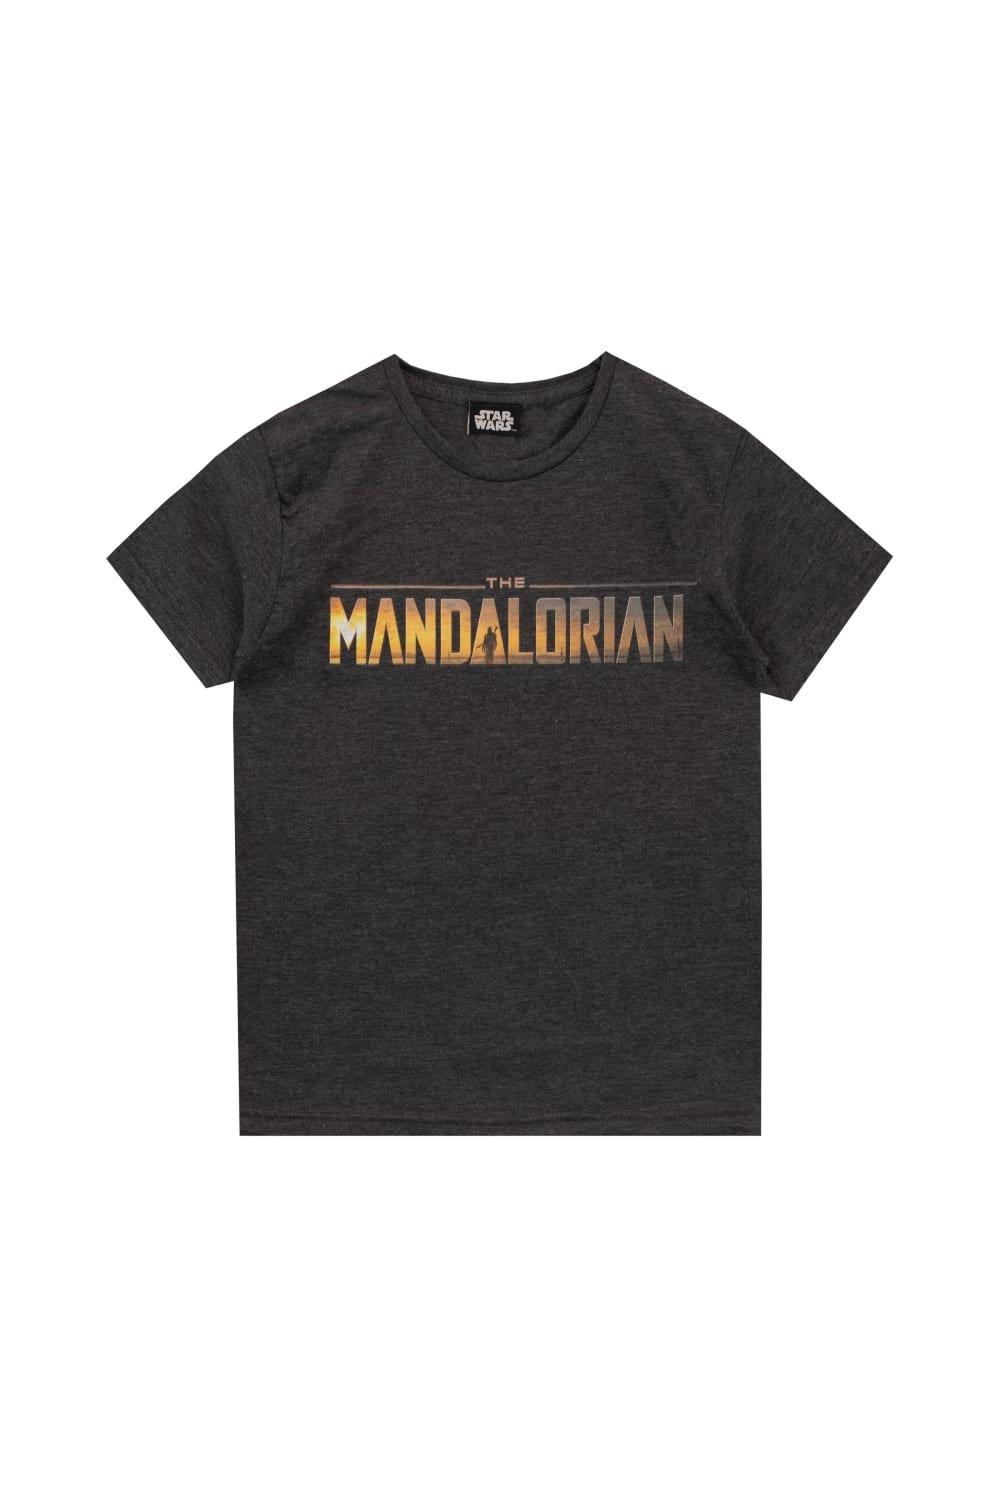 This Is The Way Mandalorian T-Shirt